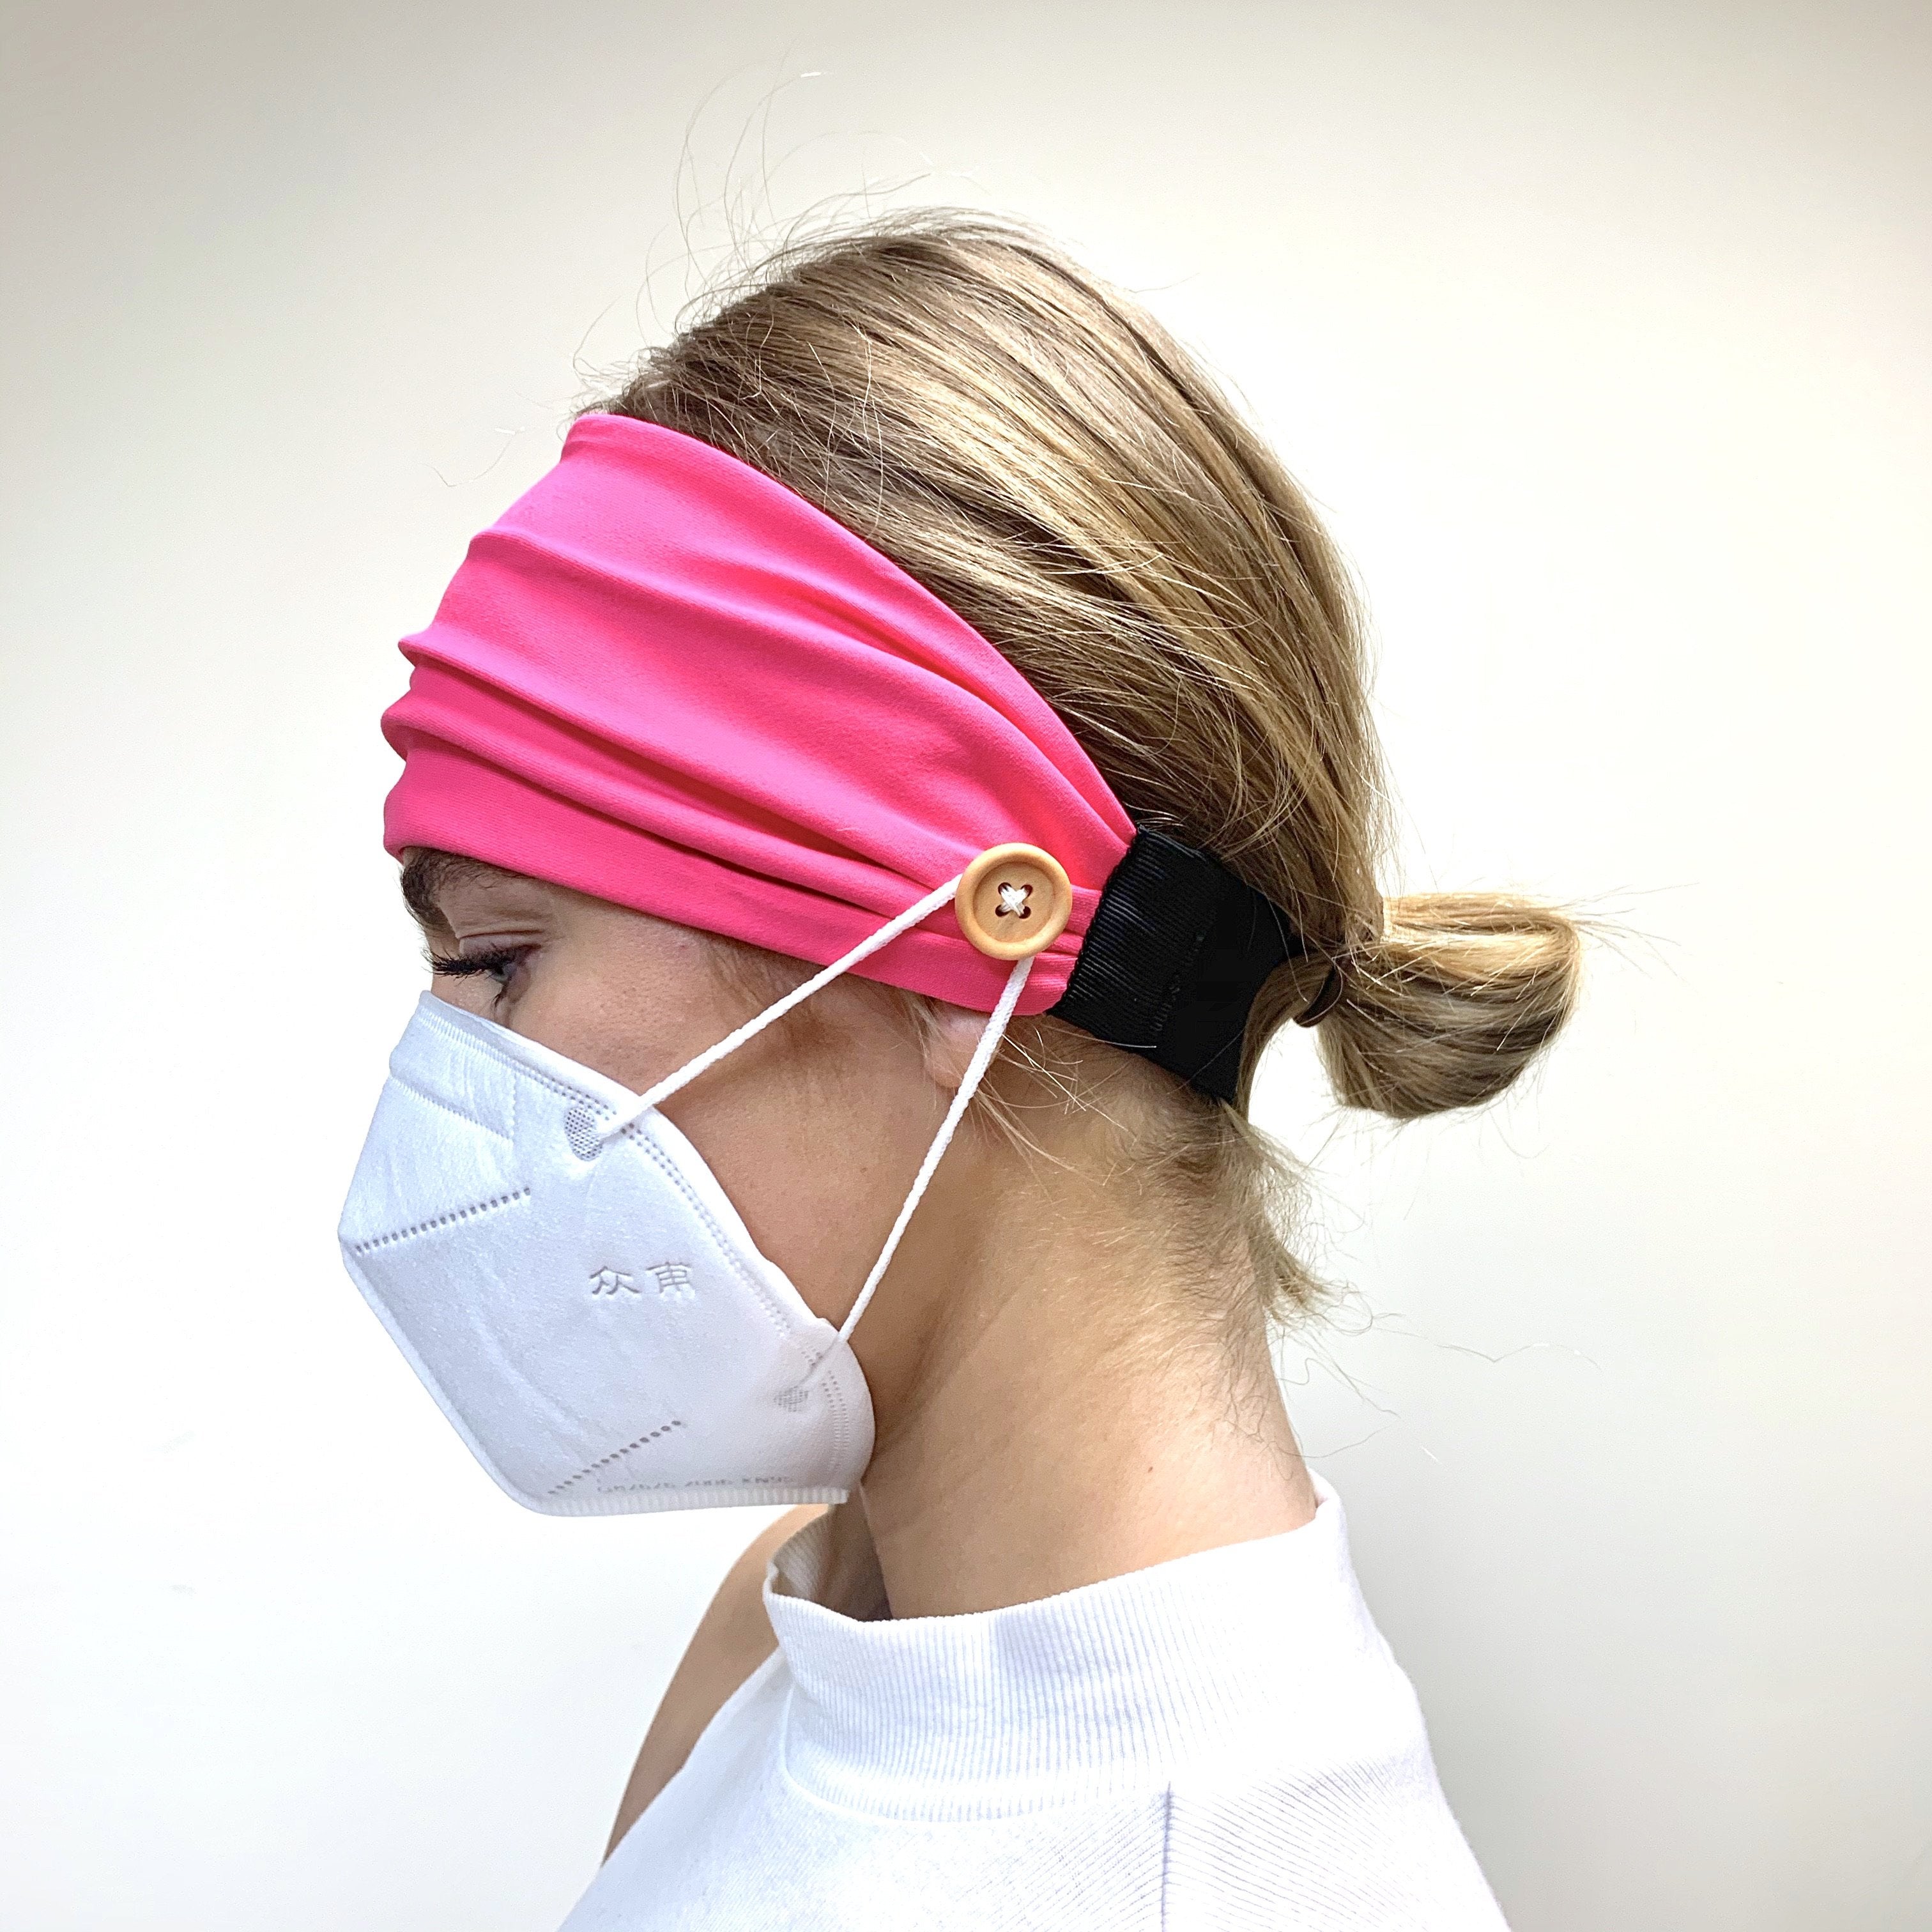 Original Headbands with Buttons for Holding Face Masks in Place